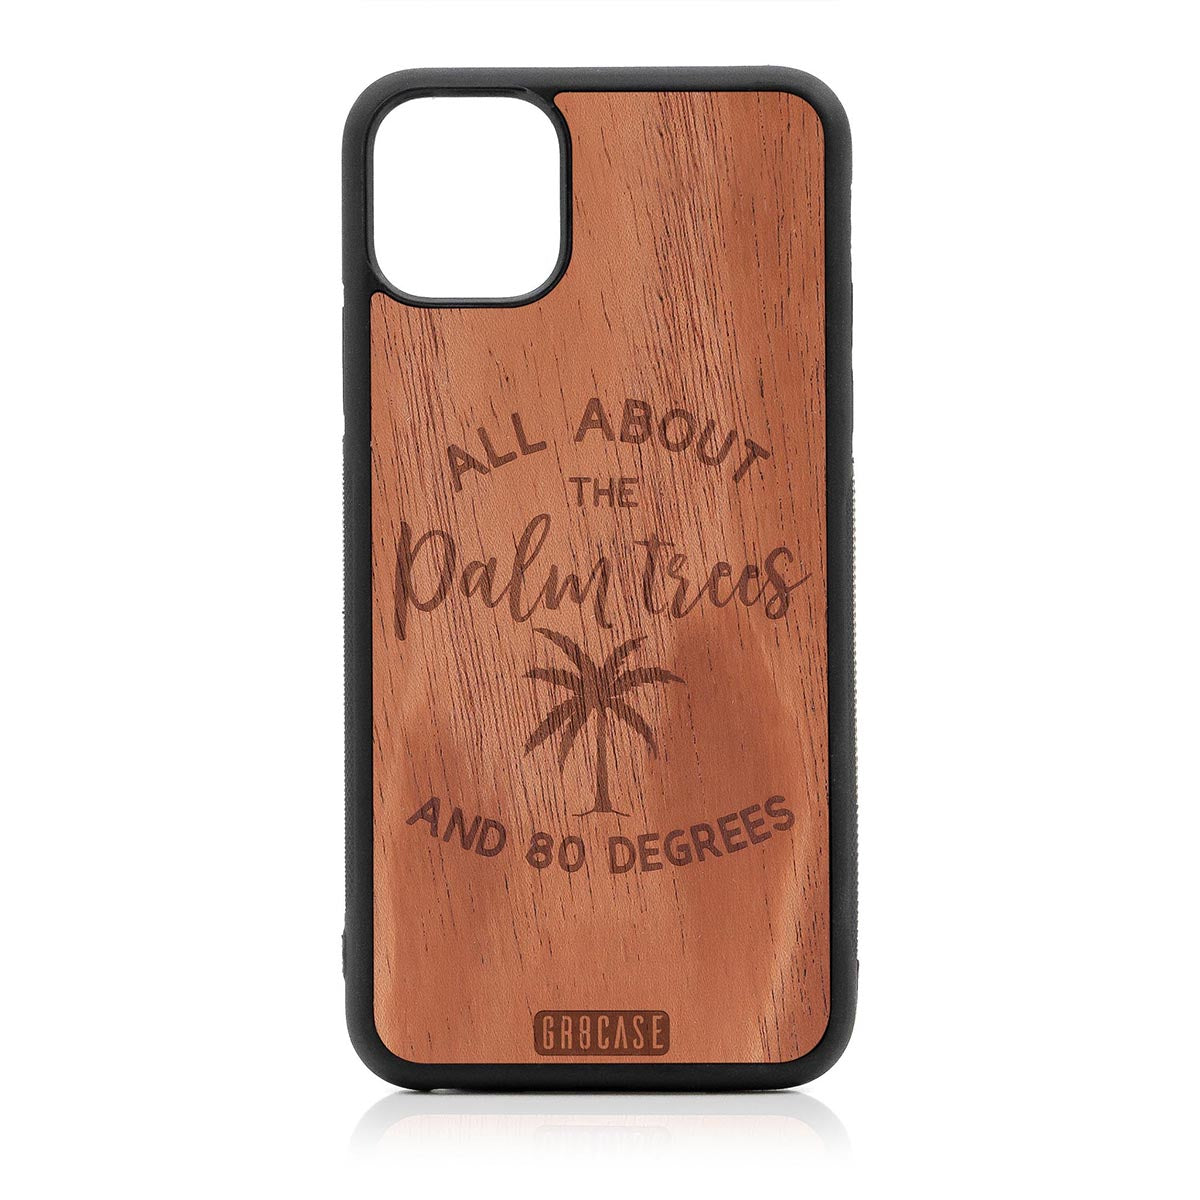 All About The Palm Trees and 80 Degrees Design Wood Case For iPhone 11 Pro Max by GR8CASE